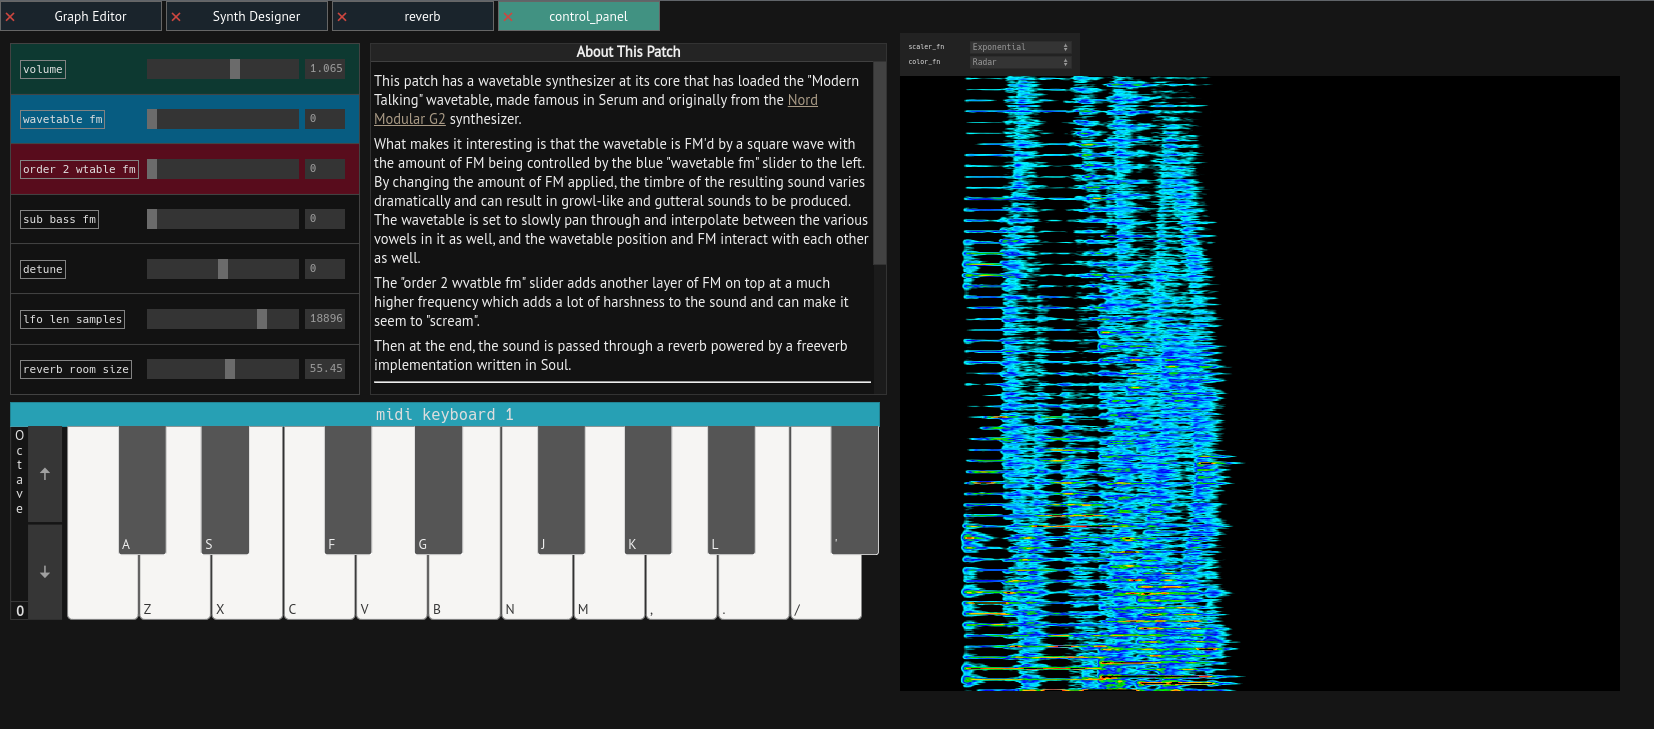 A screenshot of a UI created using the control panel module, containing a MIDI keyboard, several sliders controlling different params, a spectrogram visualization, and a text note.